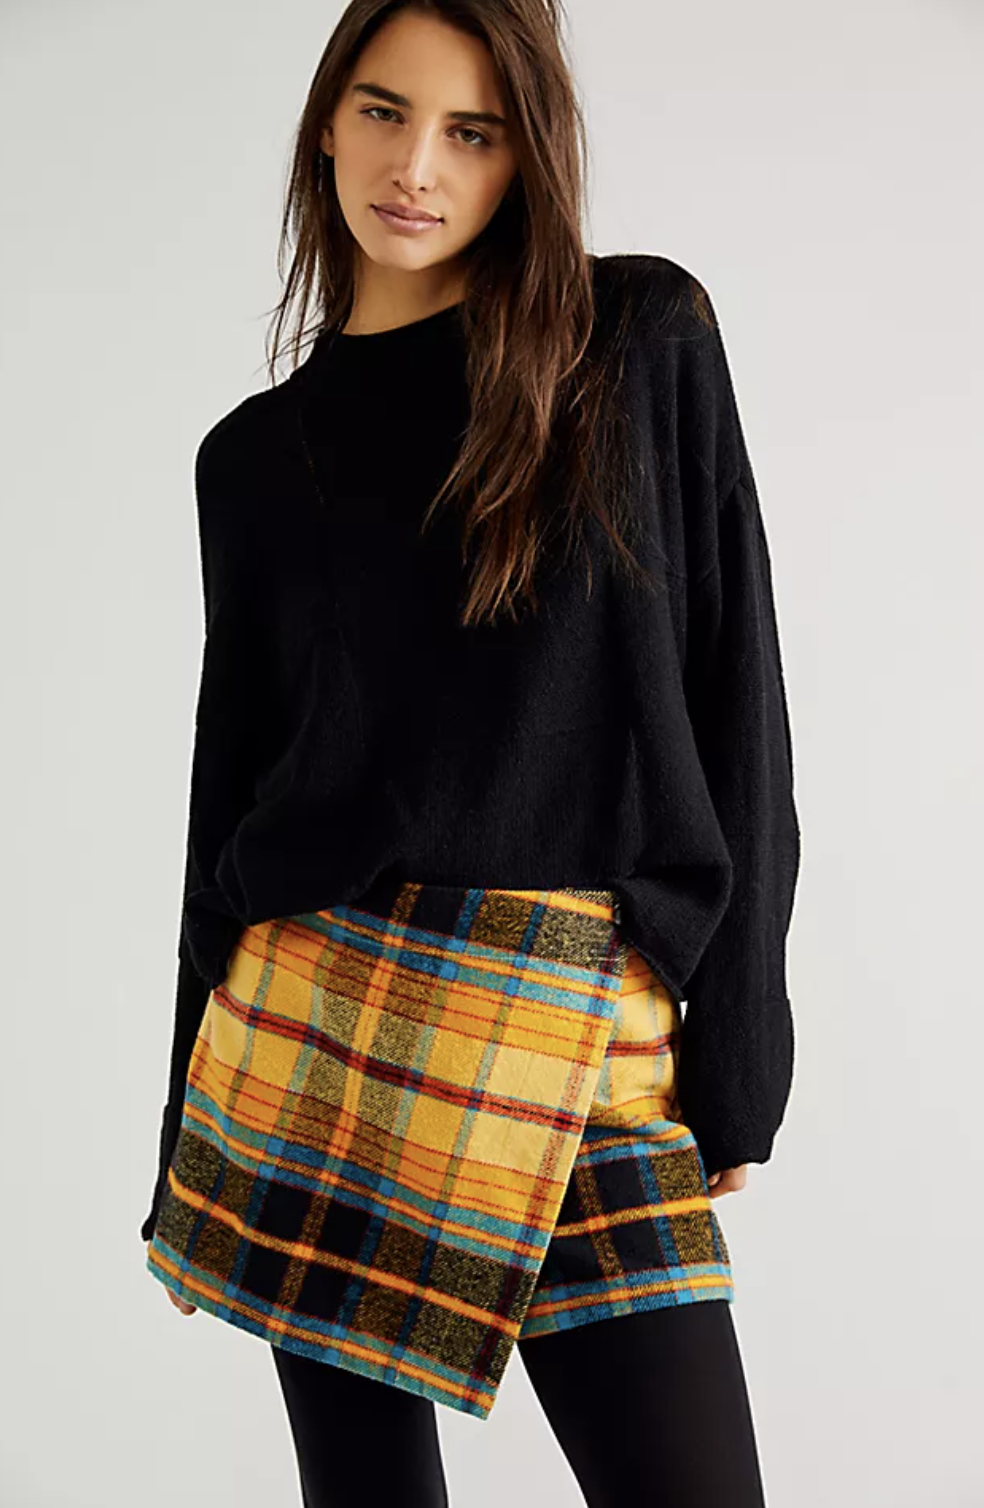 An image of a model wearing a plaid mini skort with tights